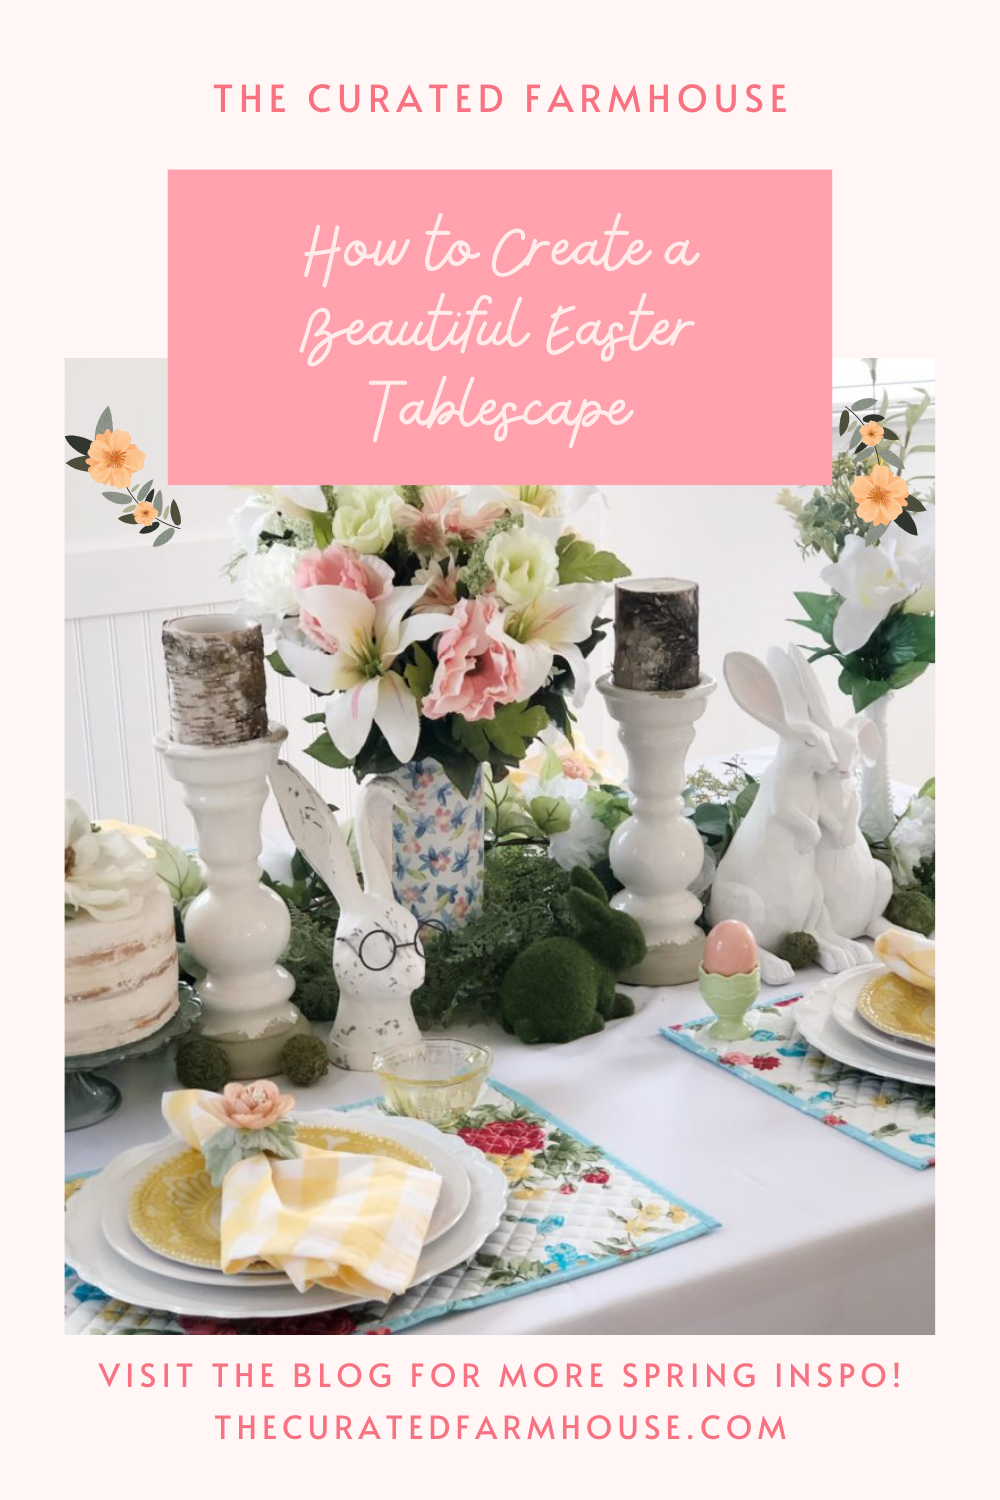 How to Create a Beautiful Easter Tablescape - The Curated Farmhouse